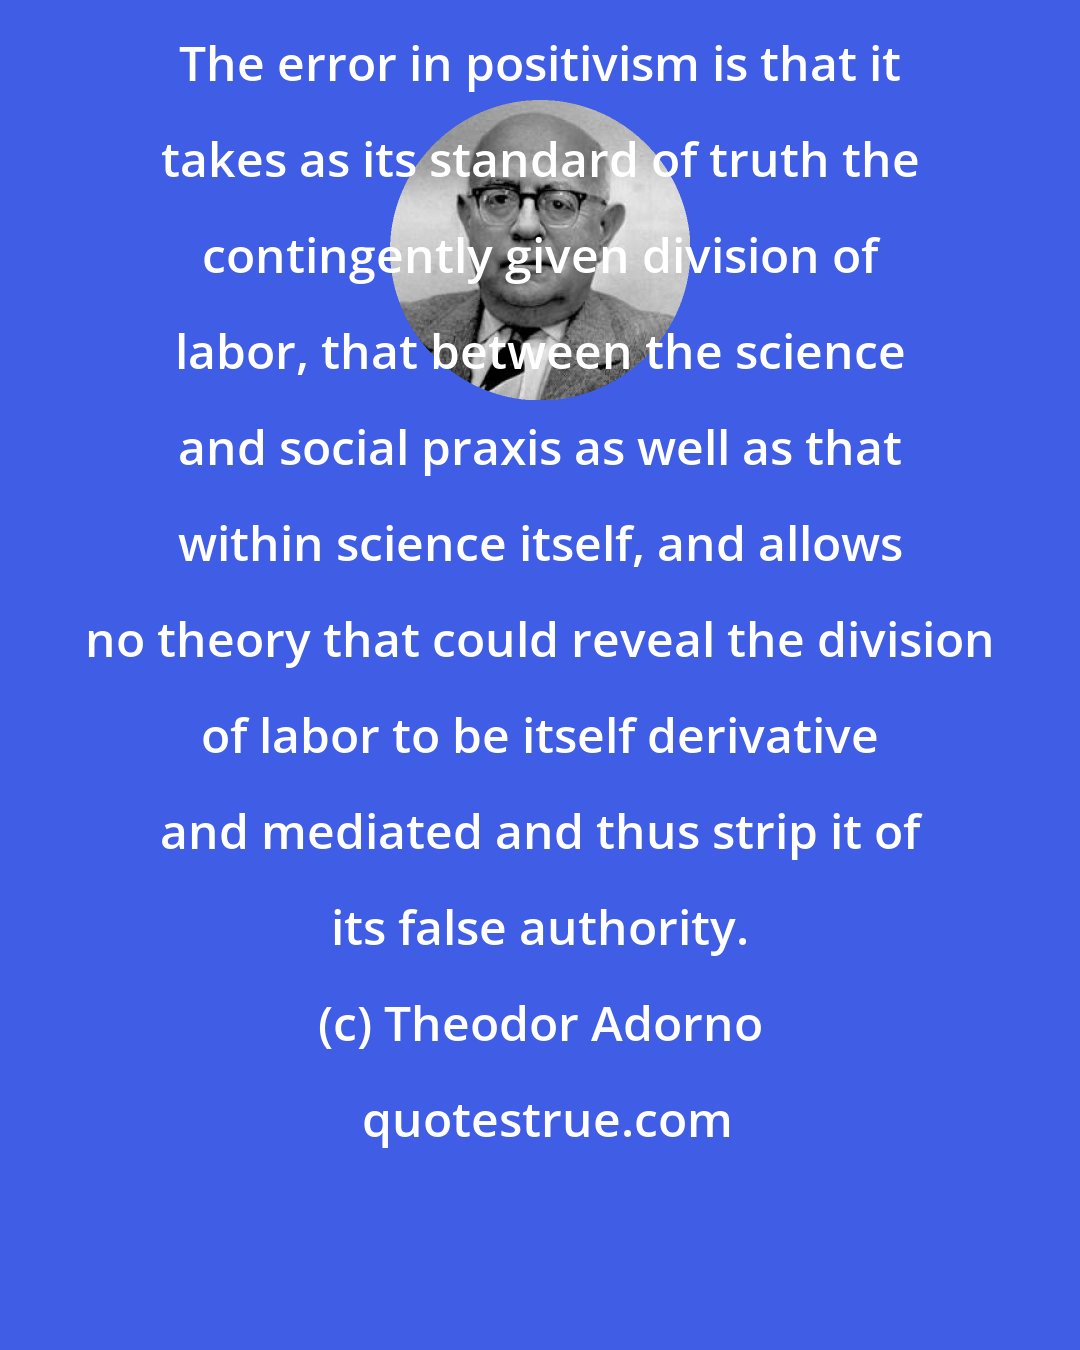 Theodor Adorno: The error in positivism is that it takes as its standard of truth the contingently given division of labor, that between the science and social praxis as well as that within science itself, and allows no theory that could reveal the division of labor to be itself derivative and mediated and thus strip it of its false authority.